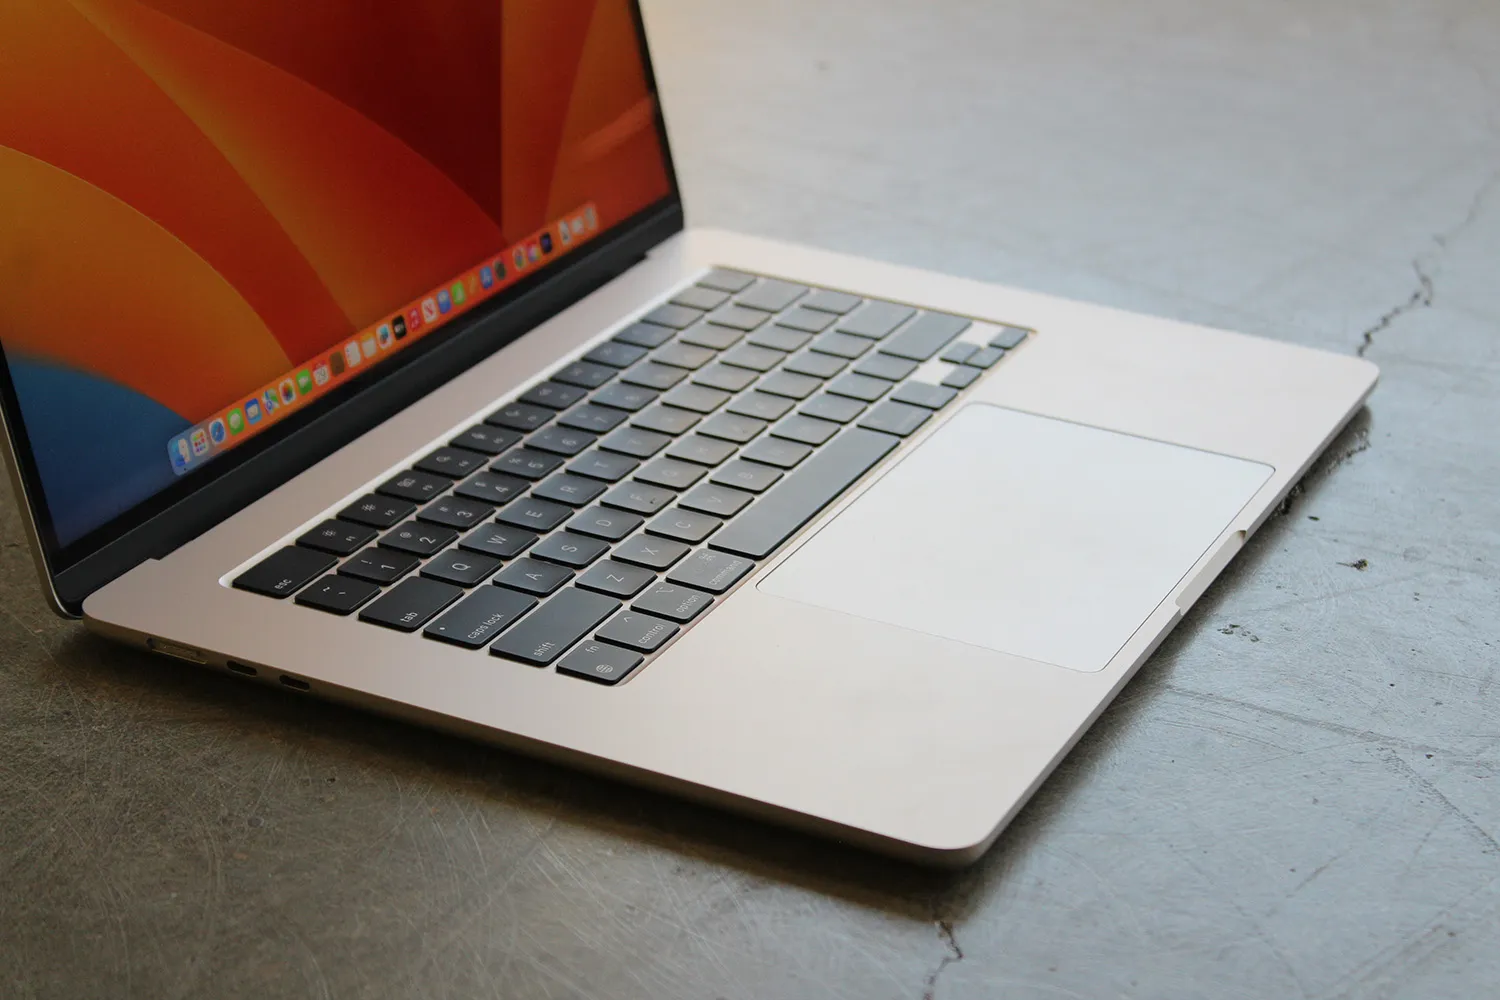 The keyboard and trackpad on Apple’s 15-inch MacBook Air.